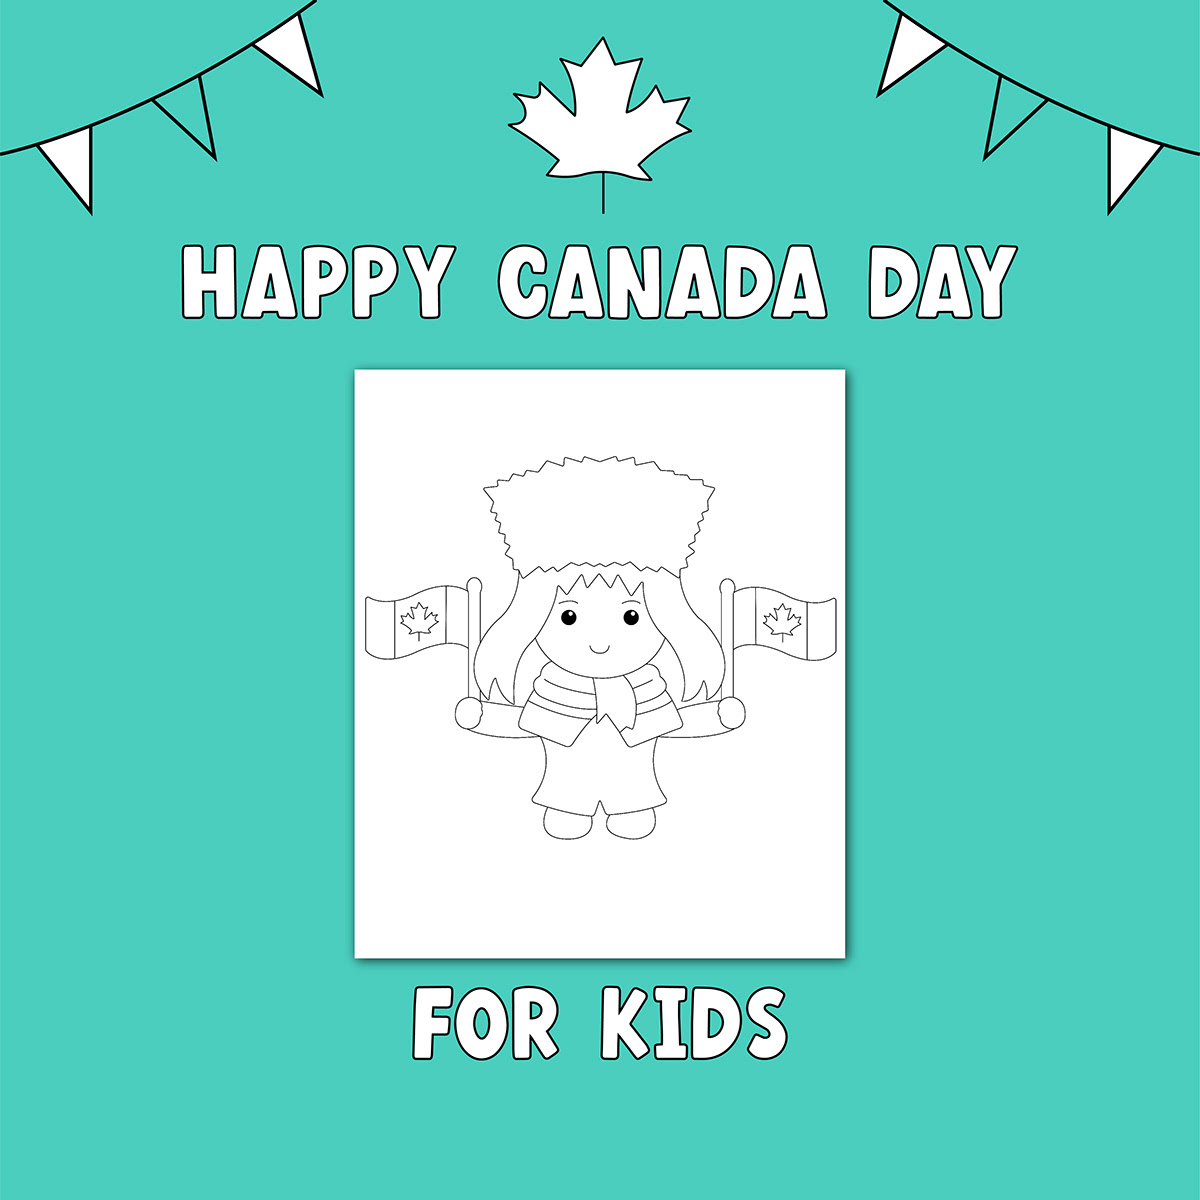 Happy Canada Day Coloring Pages For Children  

You Can Hire me in Behance  also Fiverr
